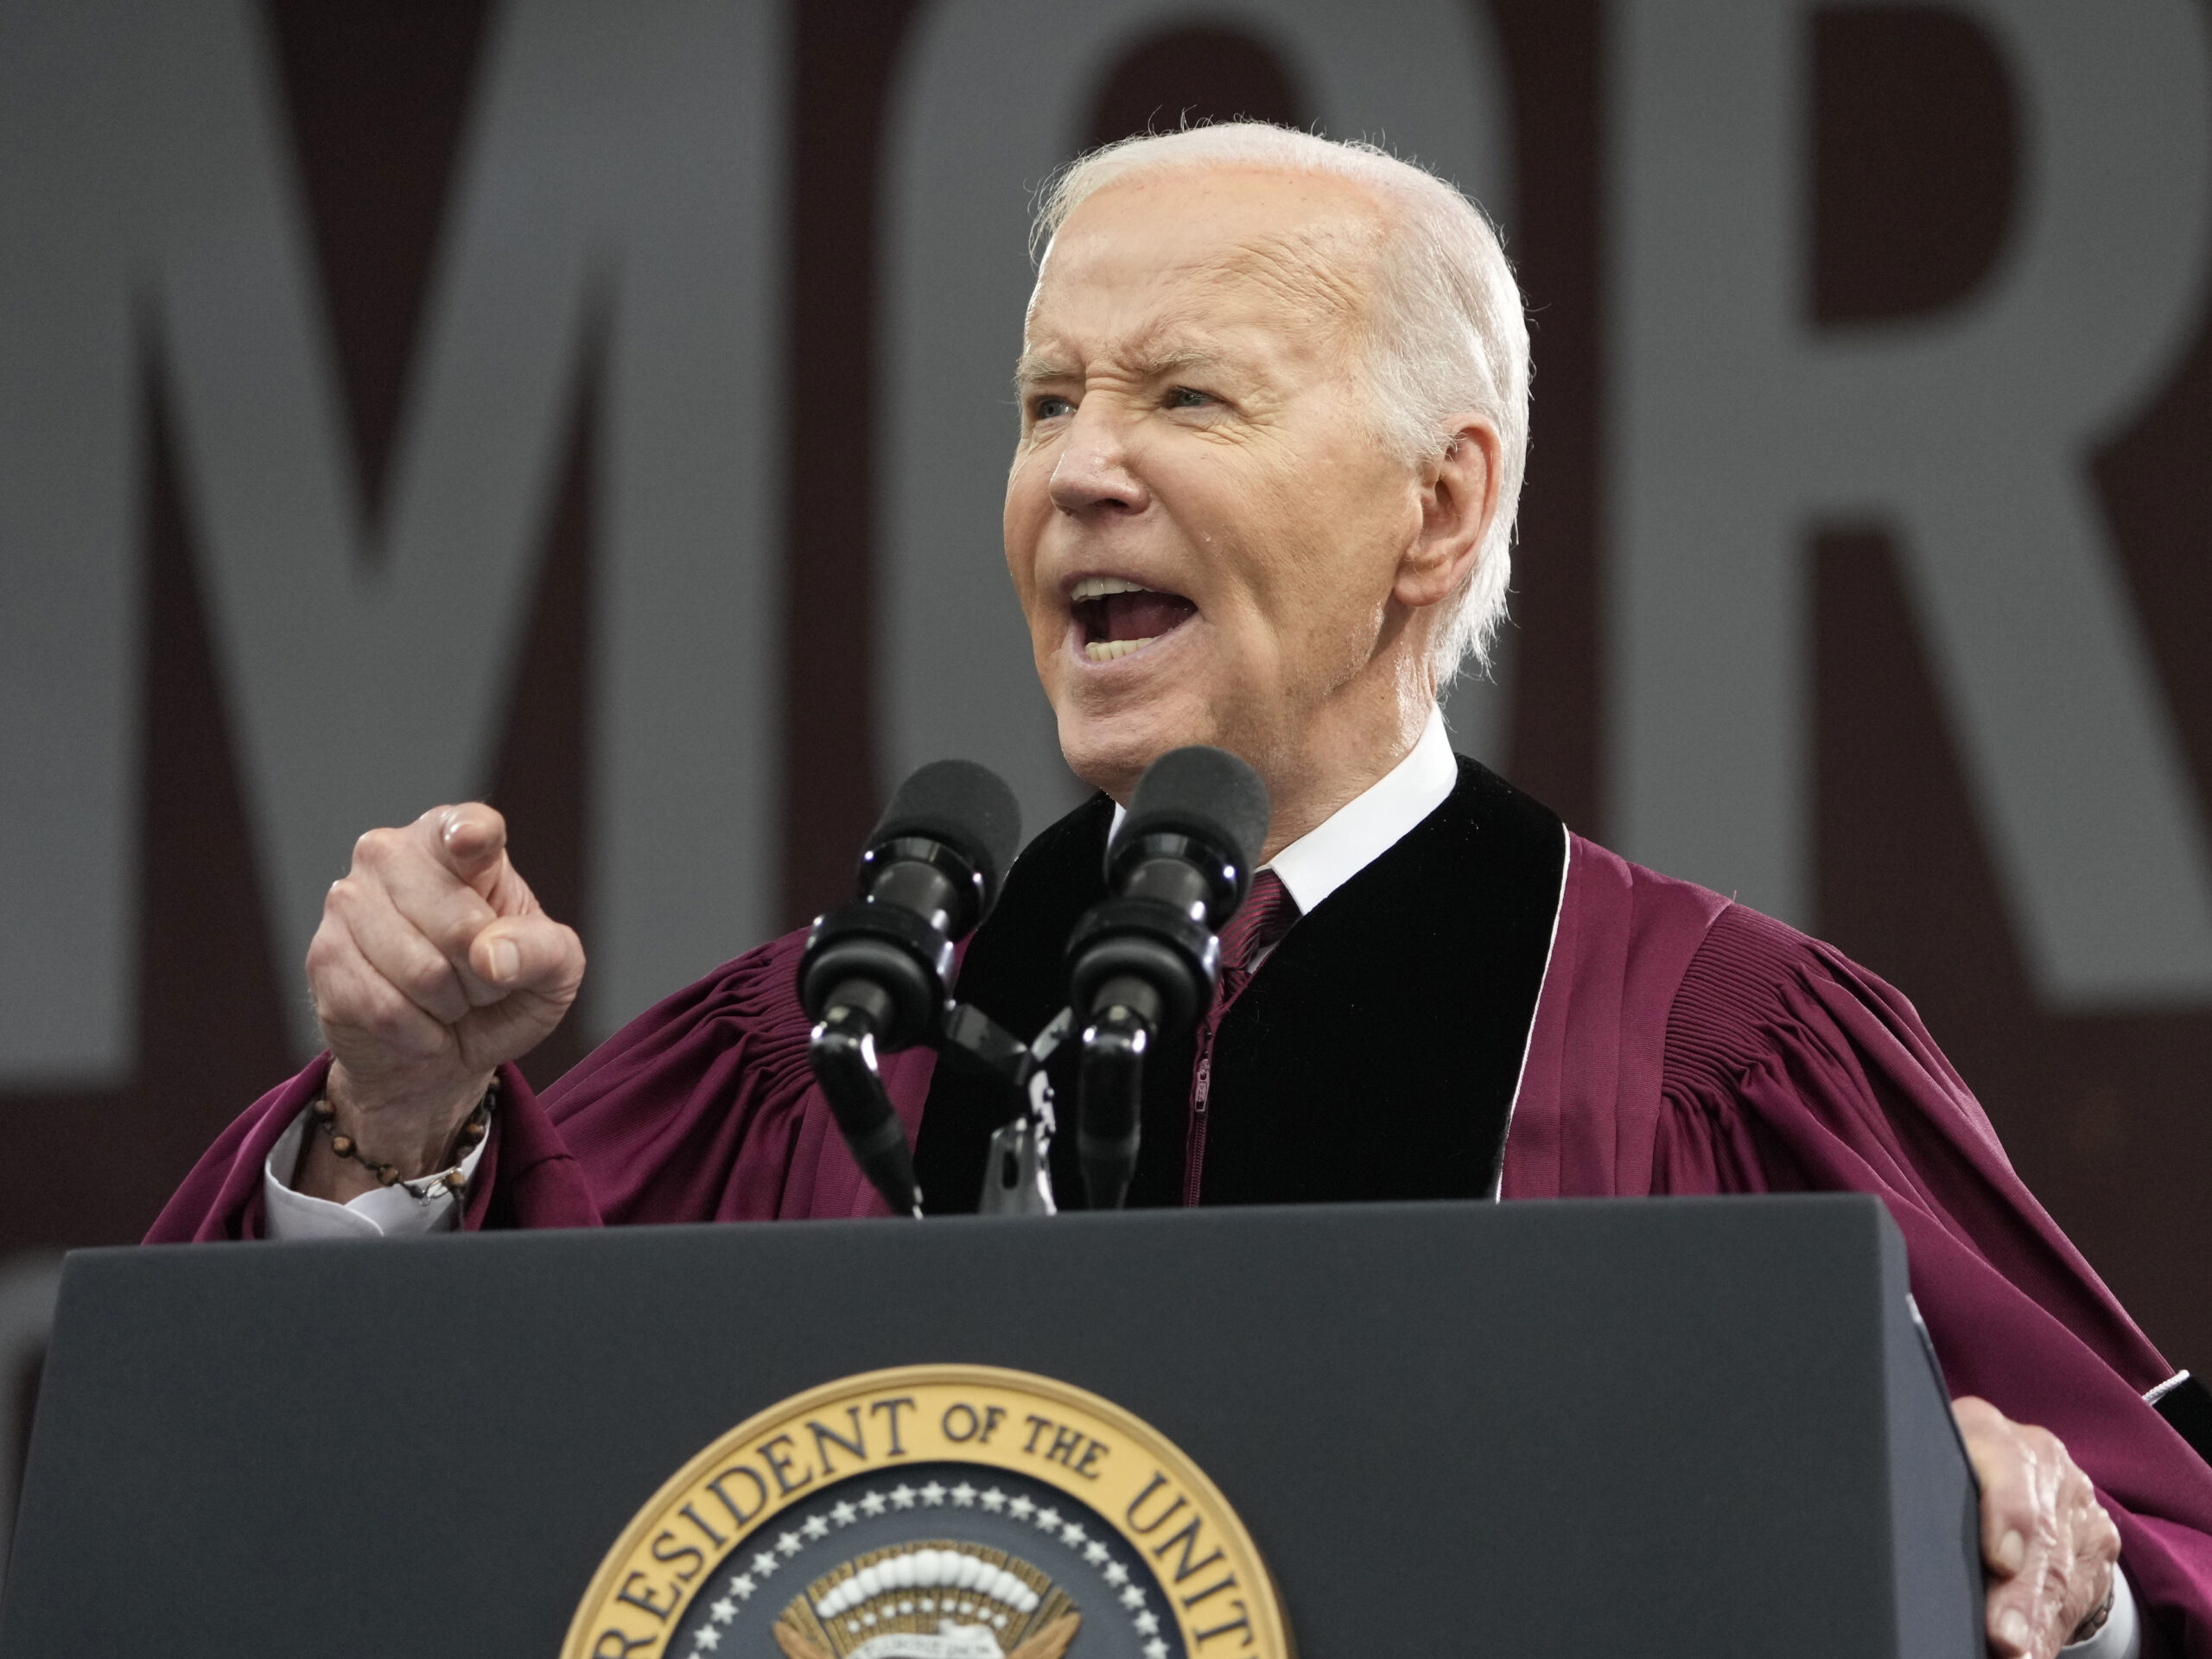 At Morehouse, Biden says dissent should be heard because democracy is ‘still the way’